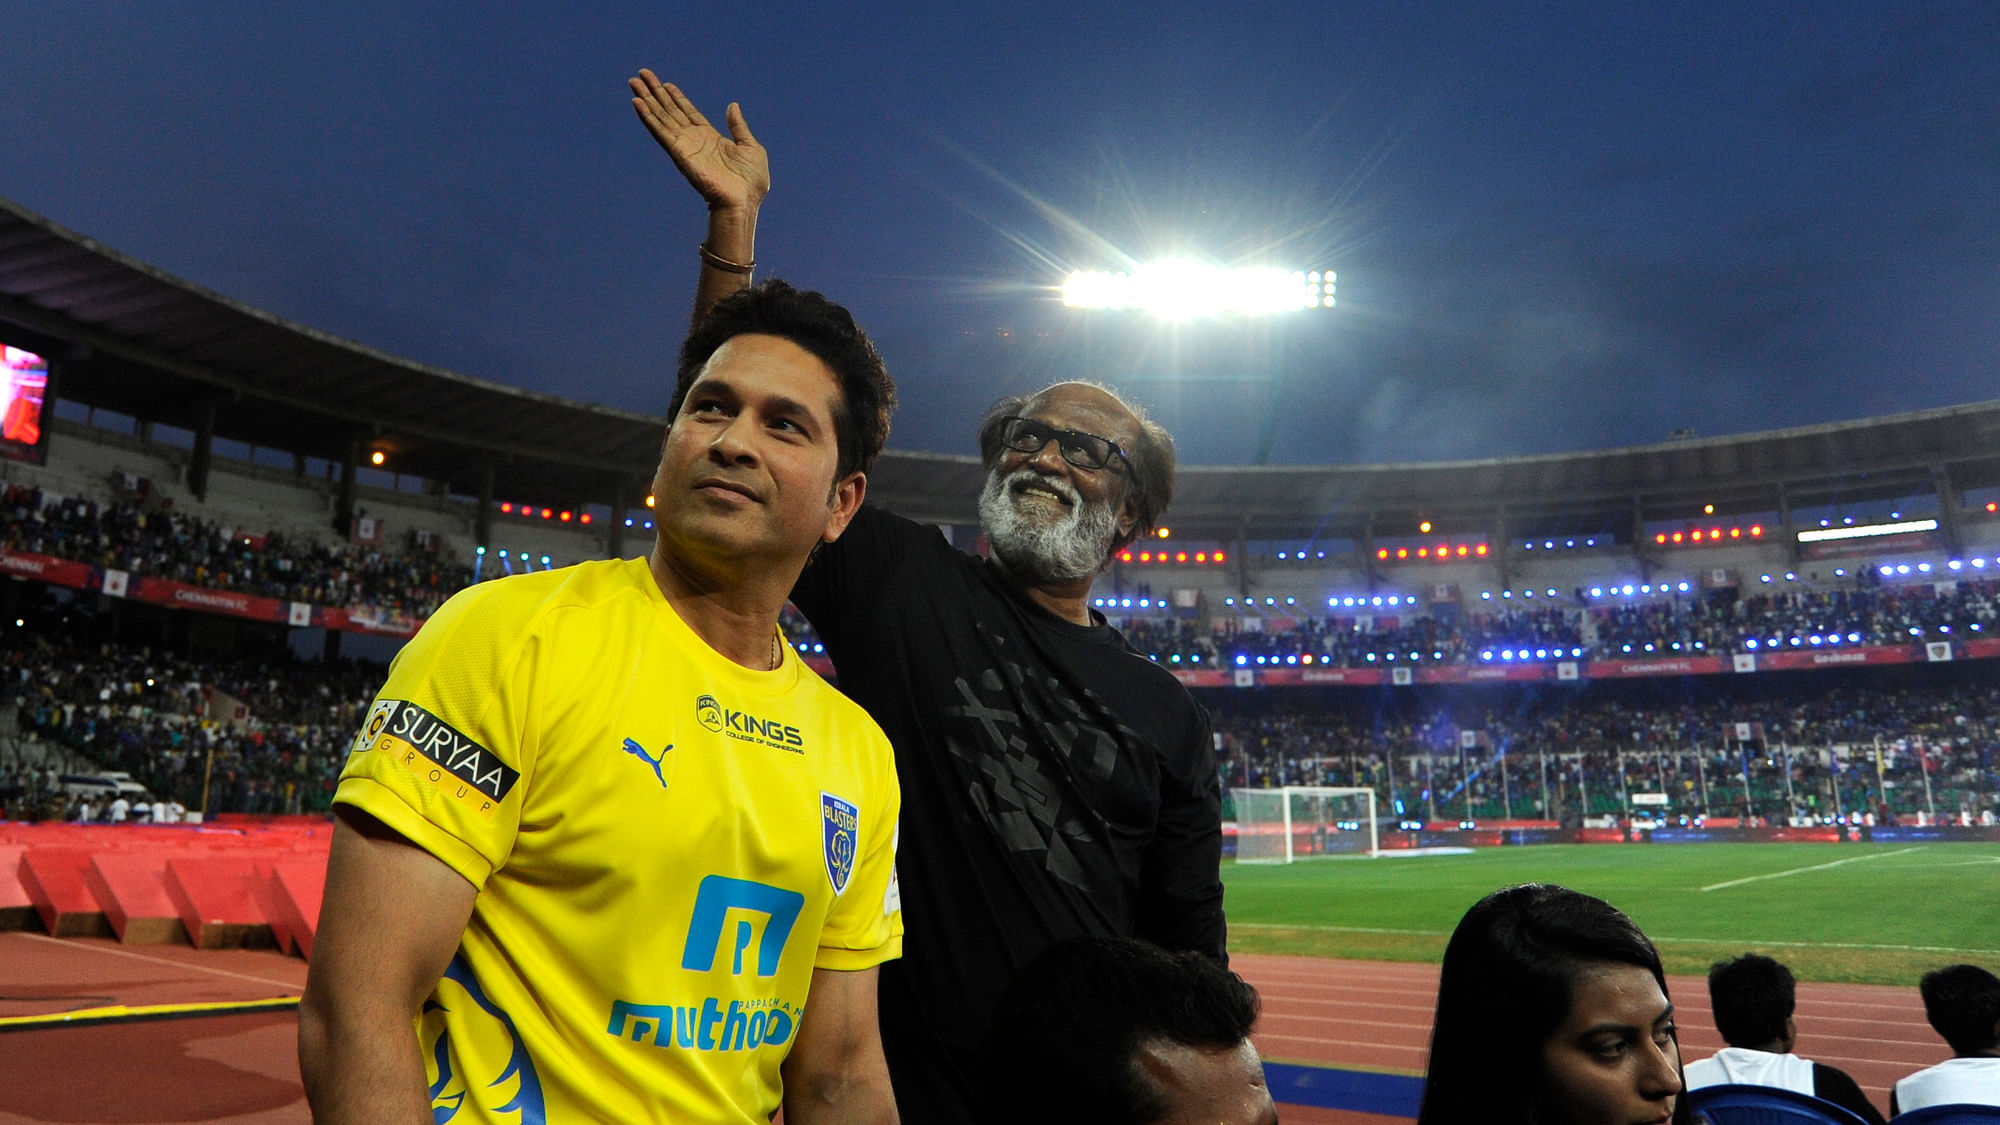 Rajnikanth and Sachin Tendulkar wave to the crowd during the opening ceremony of the Indian Super League (ISL)  held at the Jawaharlal Nehru Stadium. (Photo: ISL)